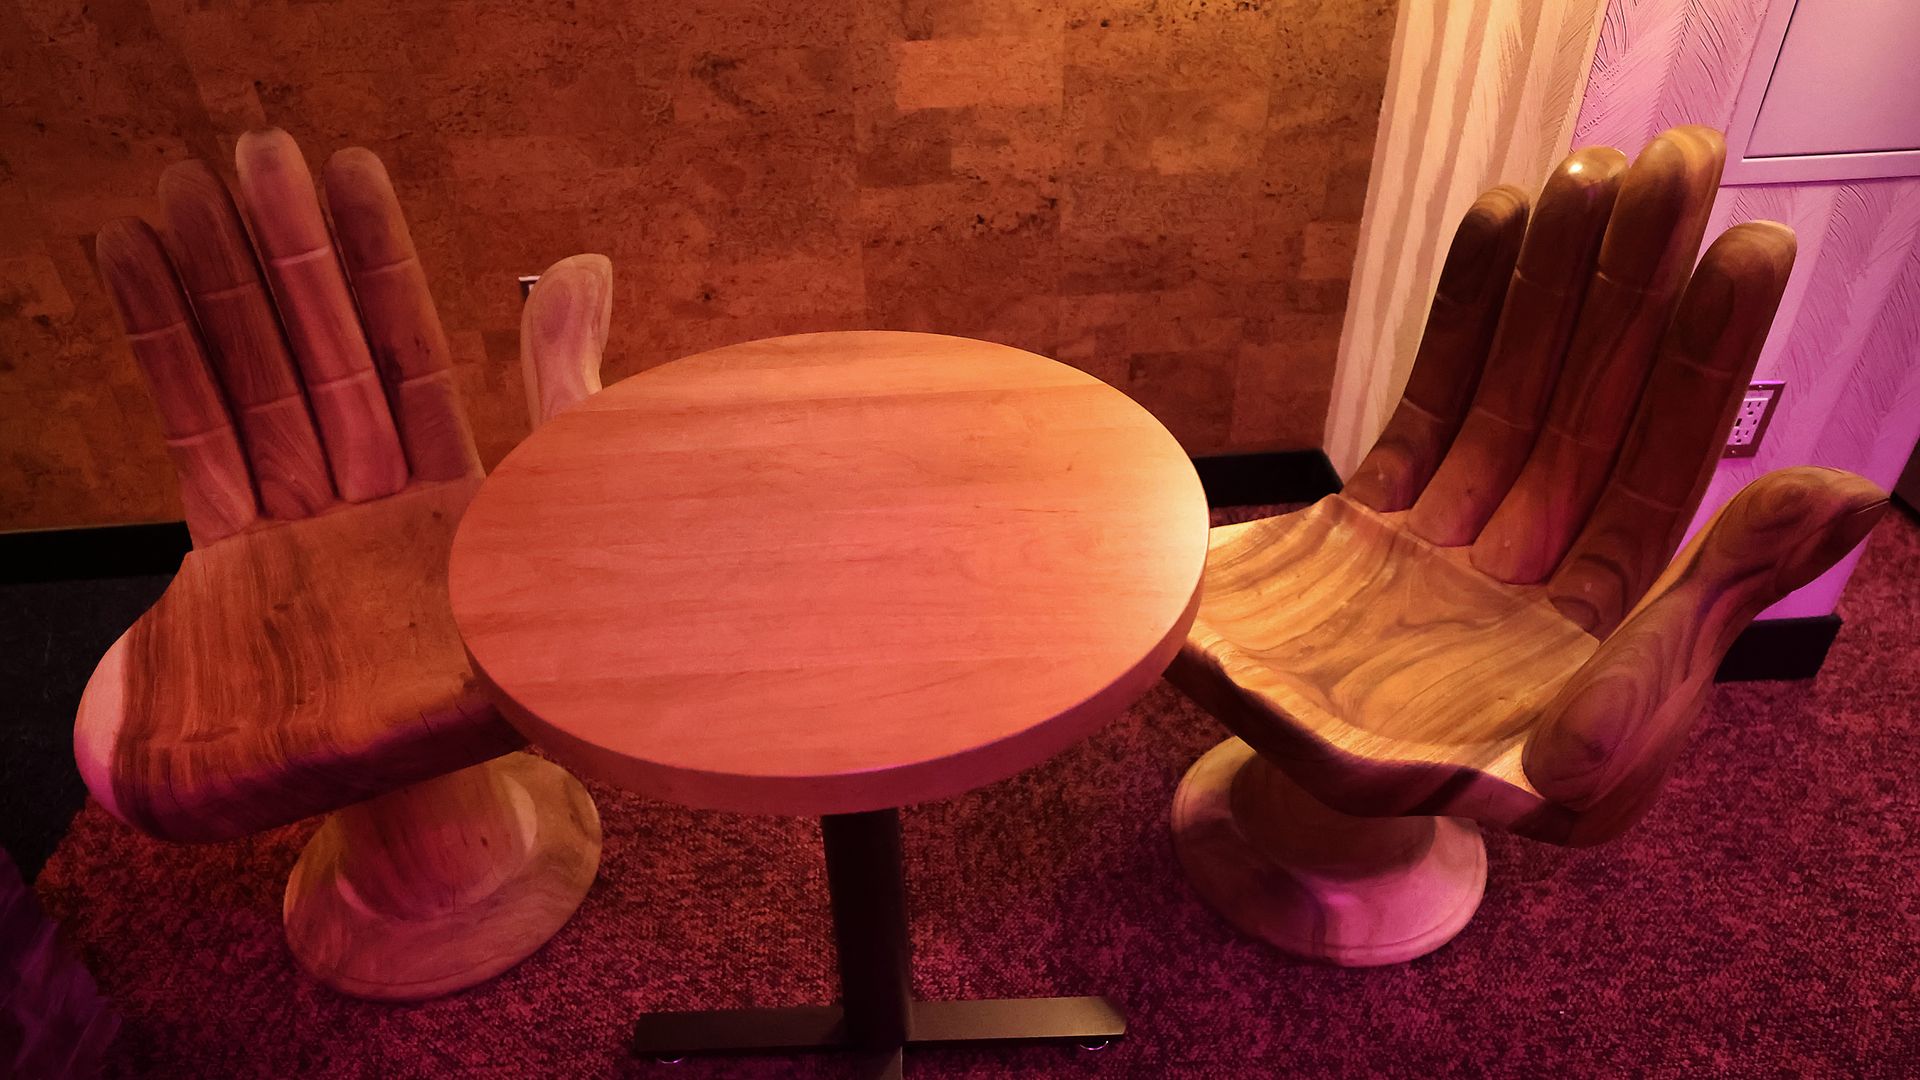 A round table with two wooden chairs shaped like hands inside Life Alive restaurant in Cambridge.